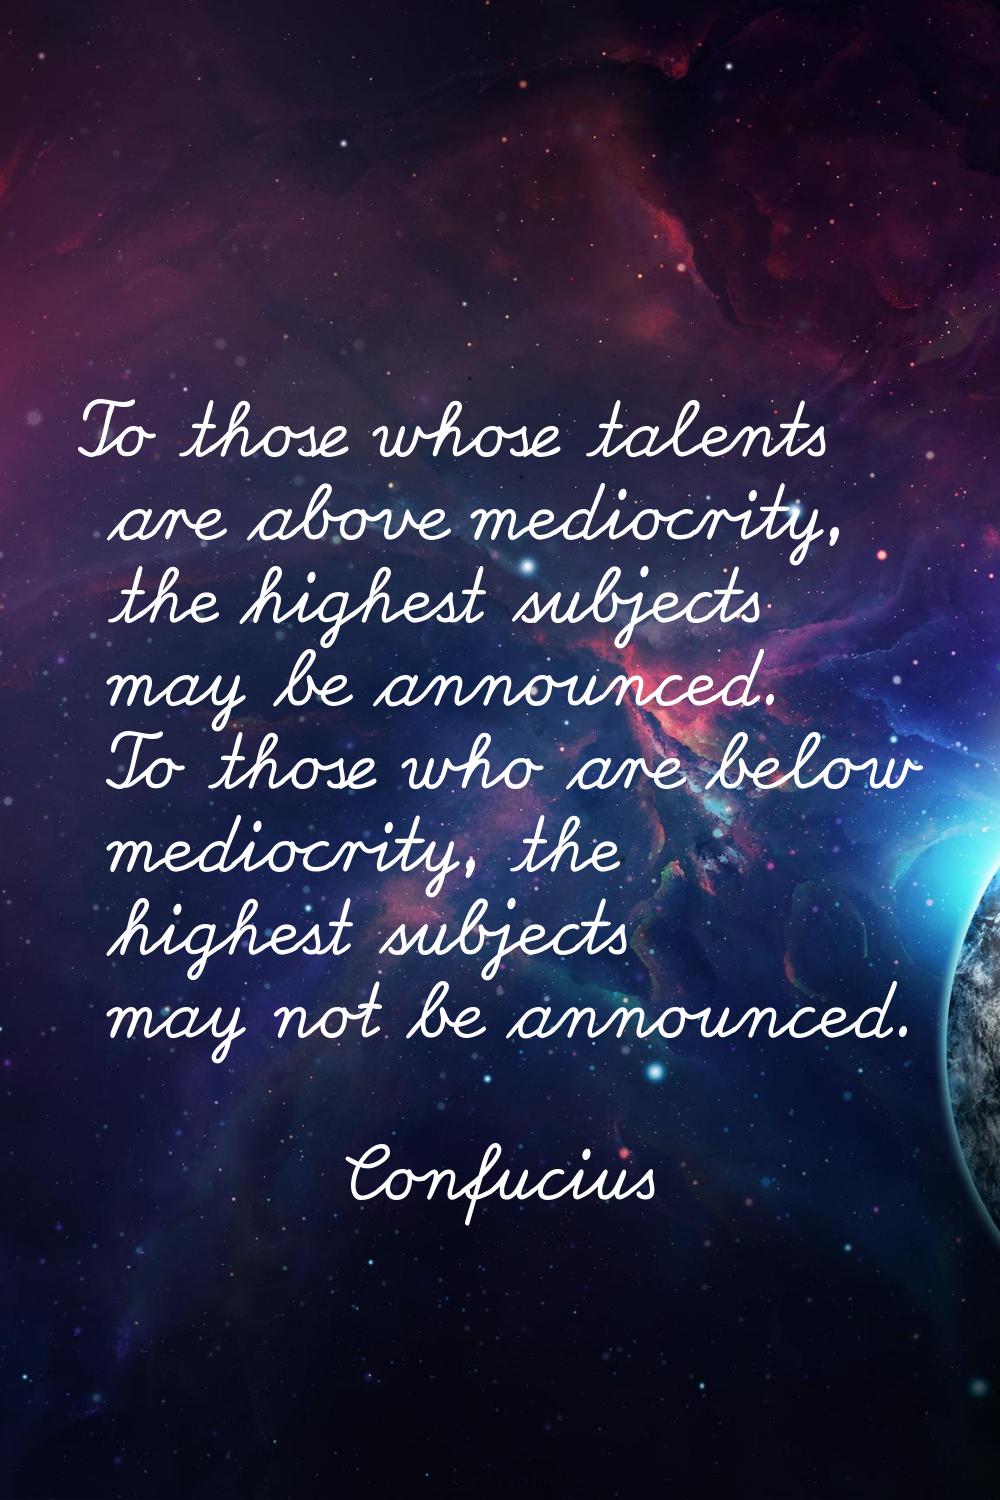 To those whose talents are above mediocrity, the highest subjects may be announced. To those who ar